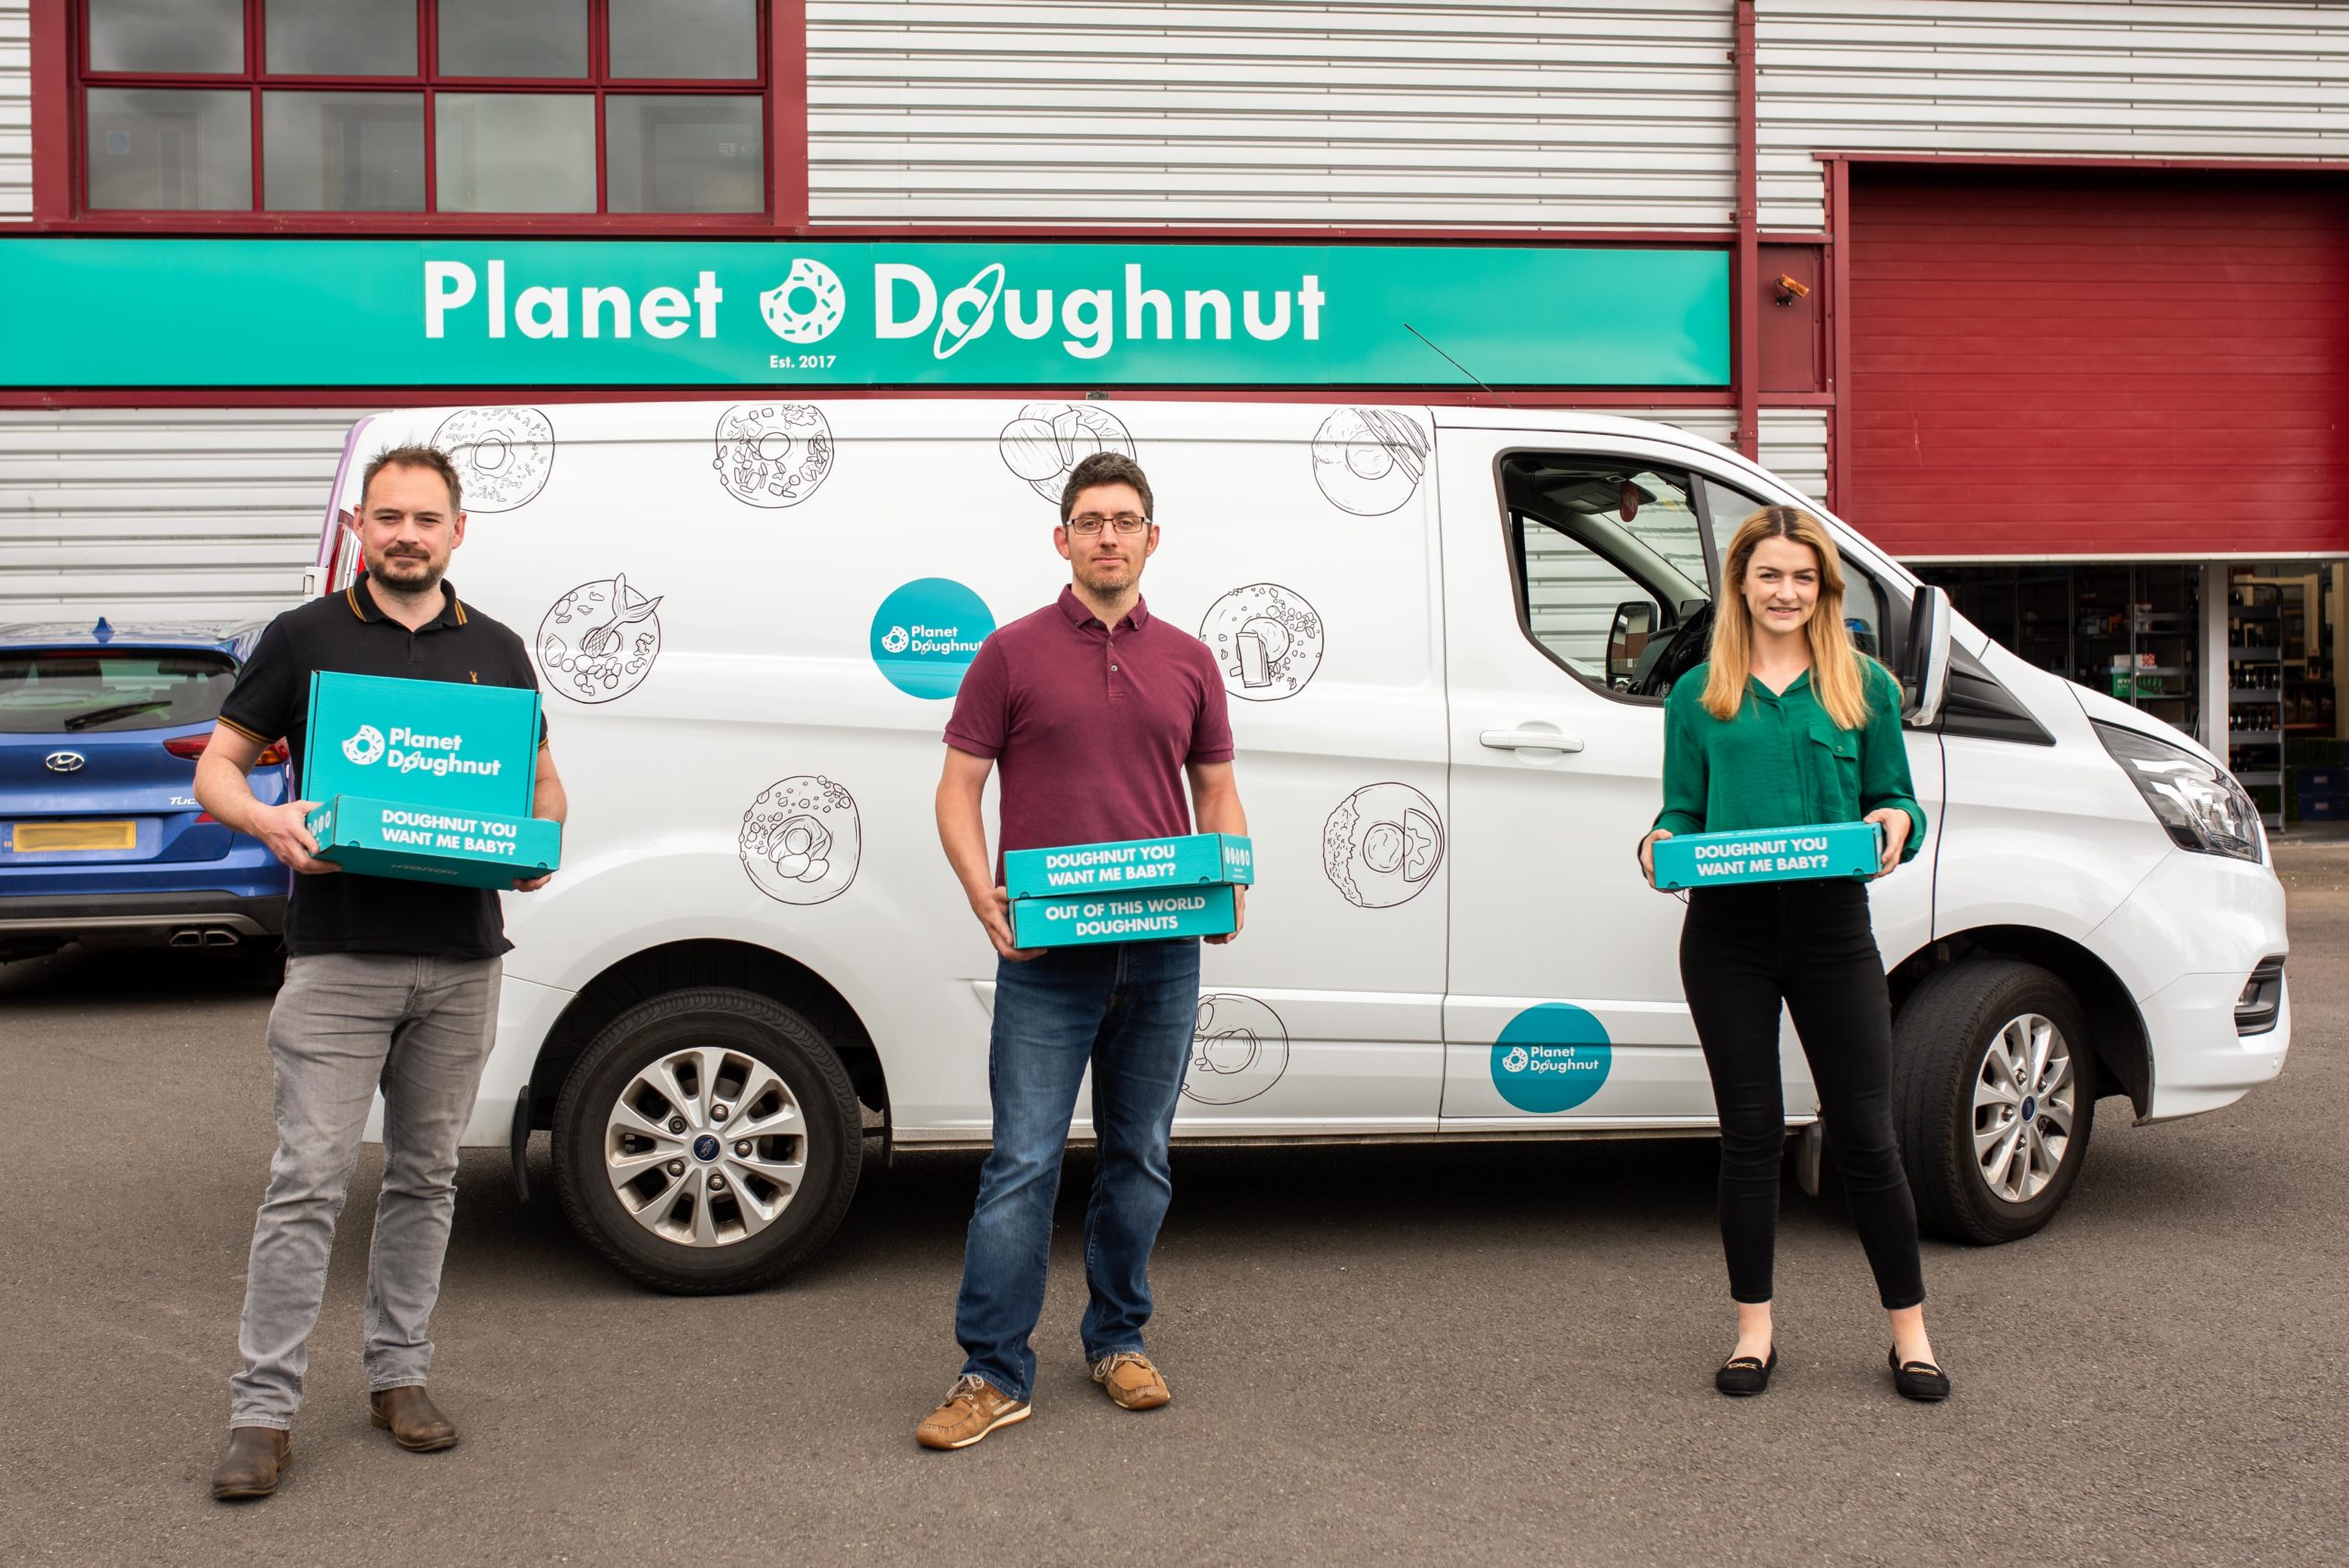 A new website ‘jam-packed’ with features for Planet Doughnut